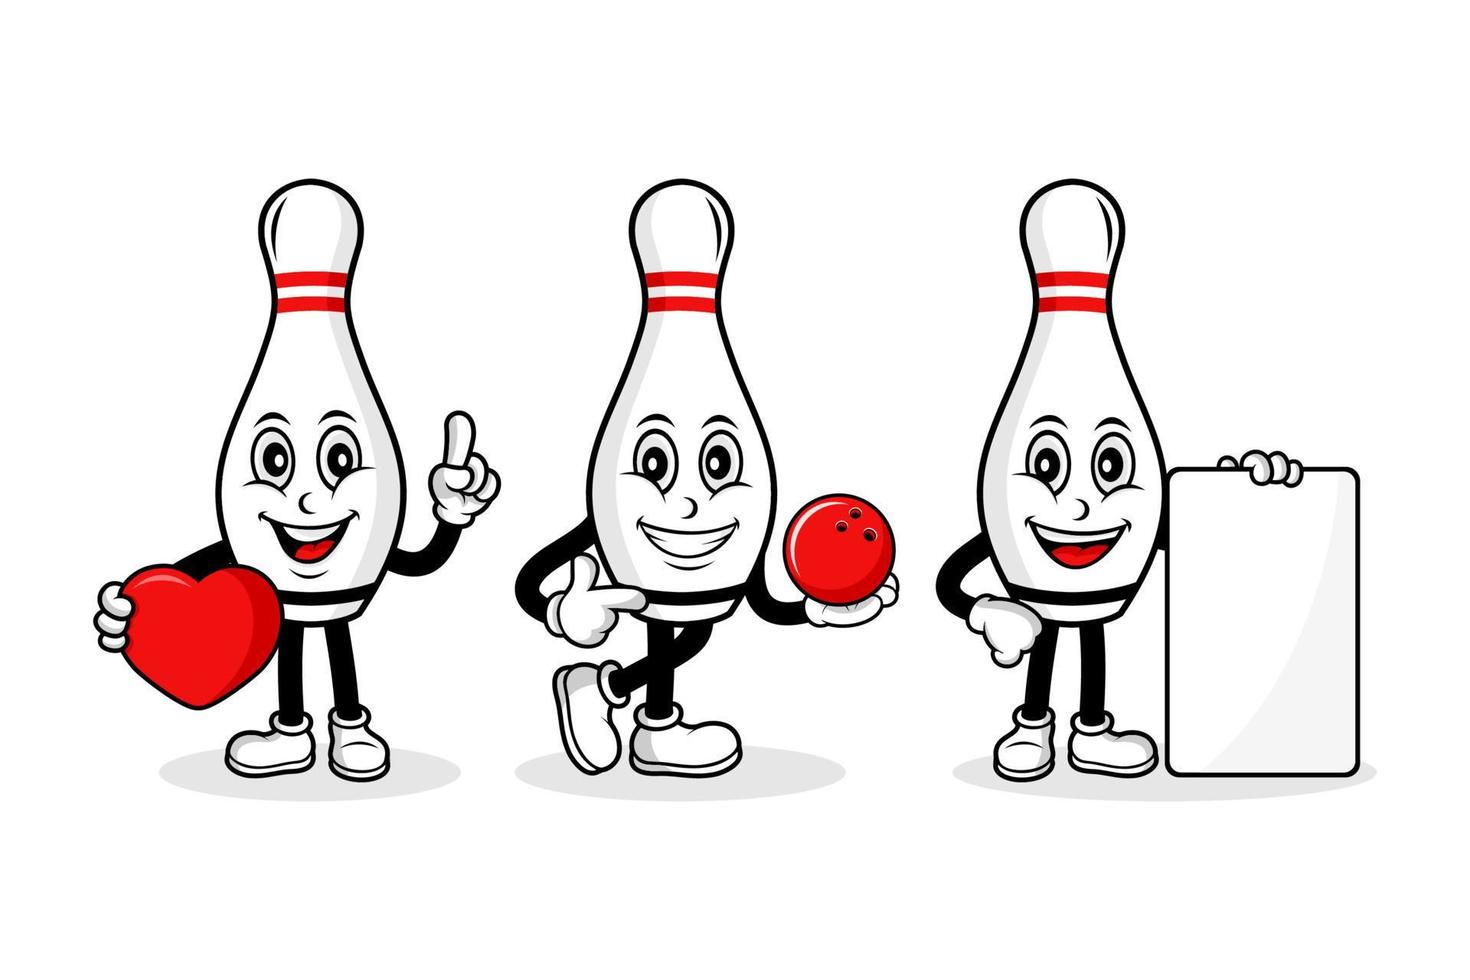 Bowling pins cartoon character design collection vector